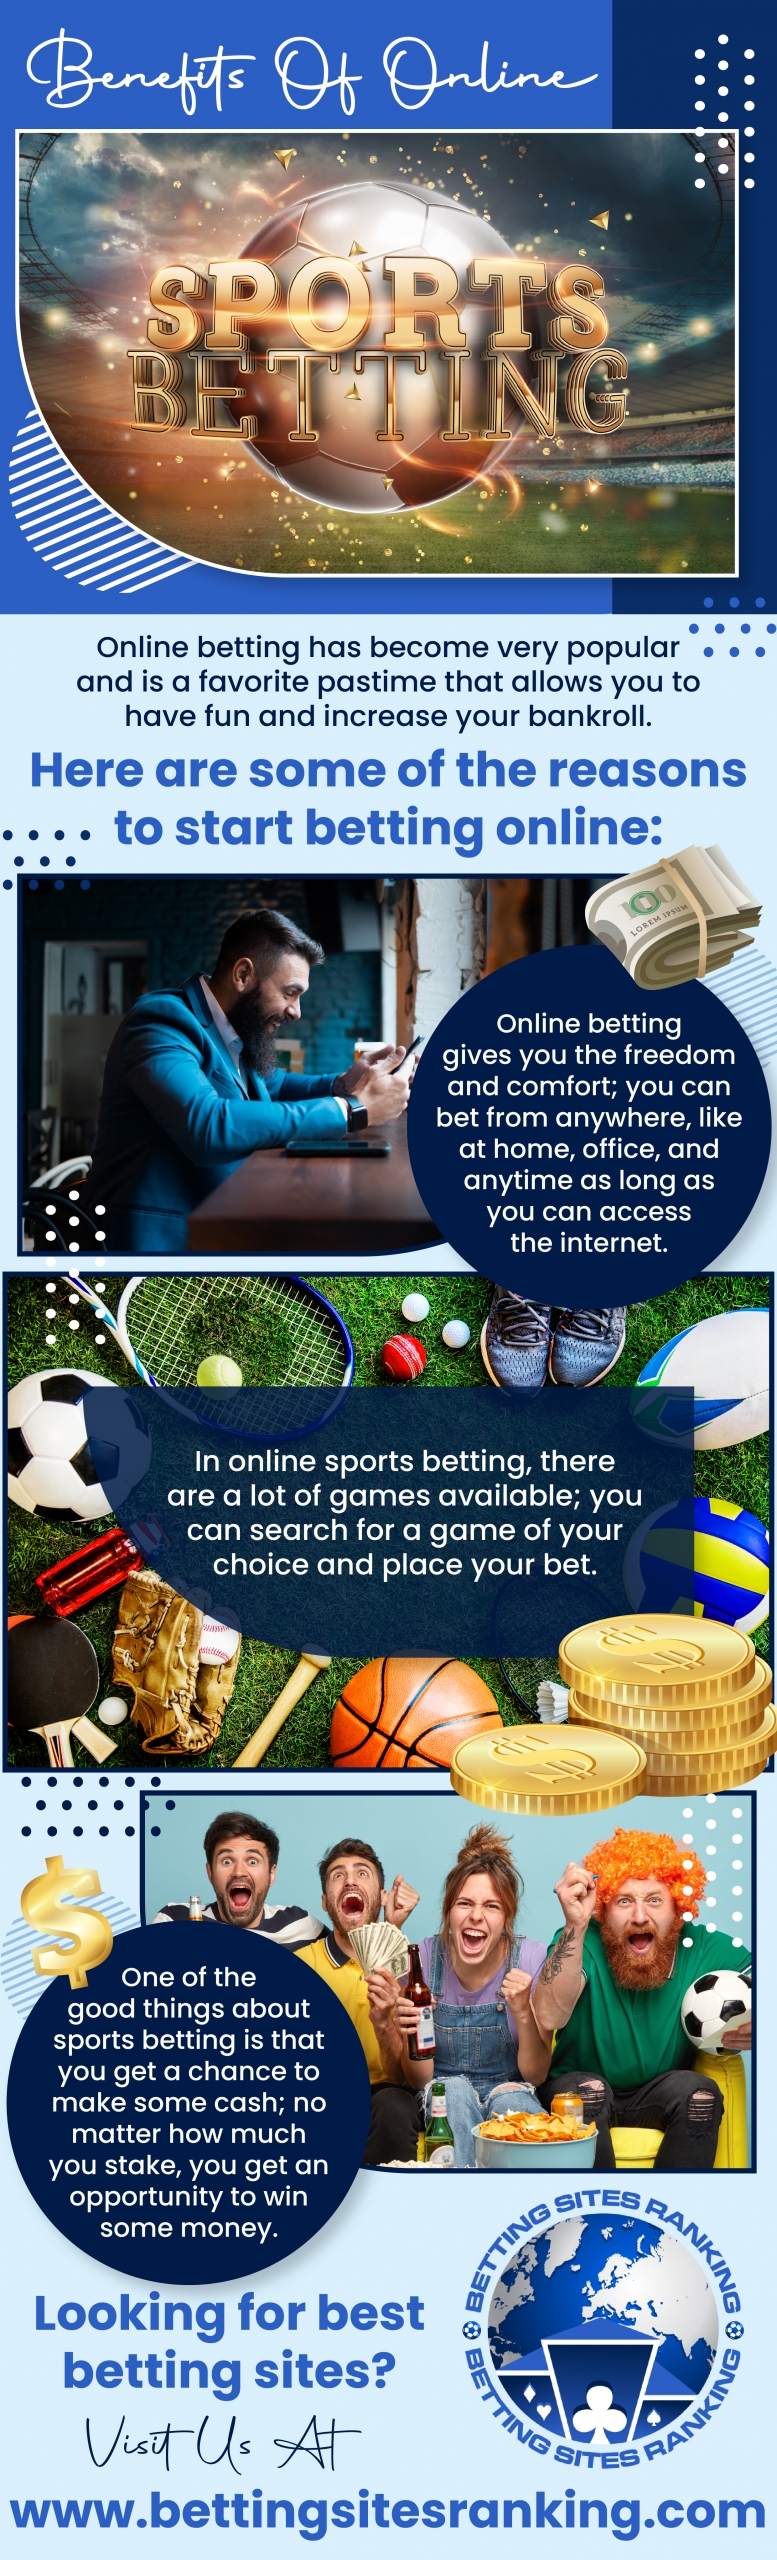 Benefits-Of-Online-Sports-Betting